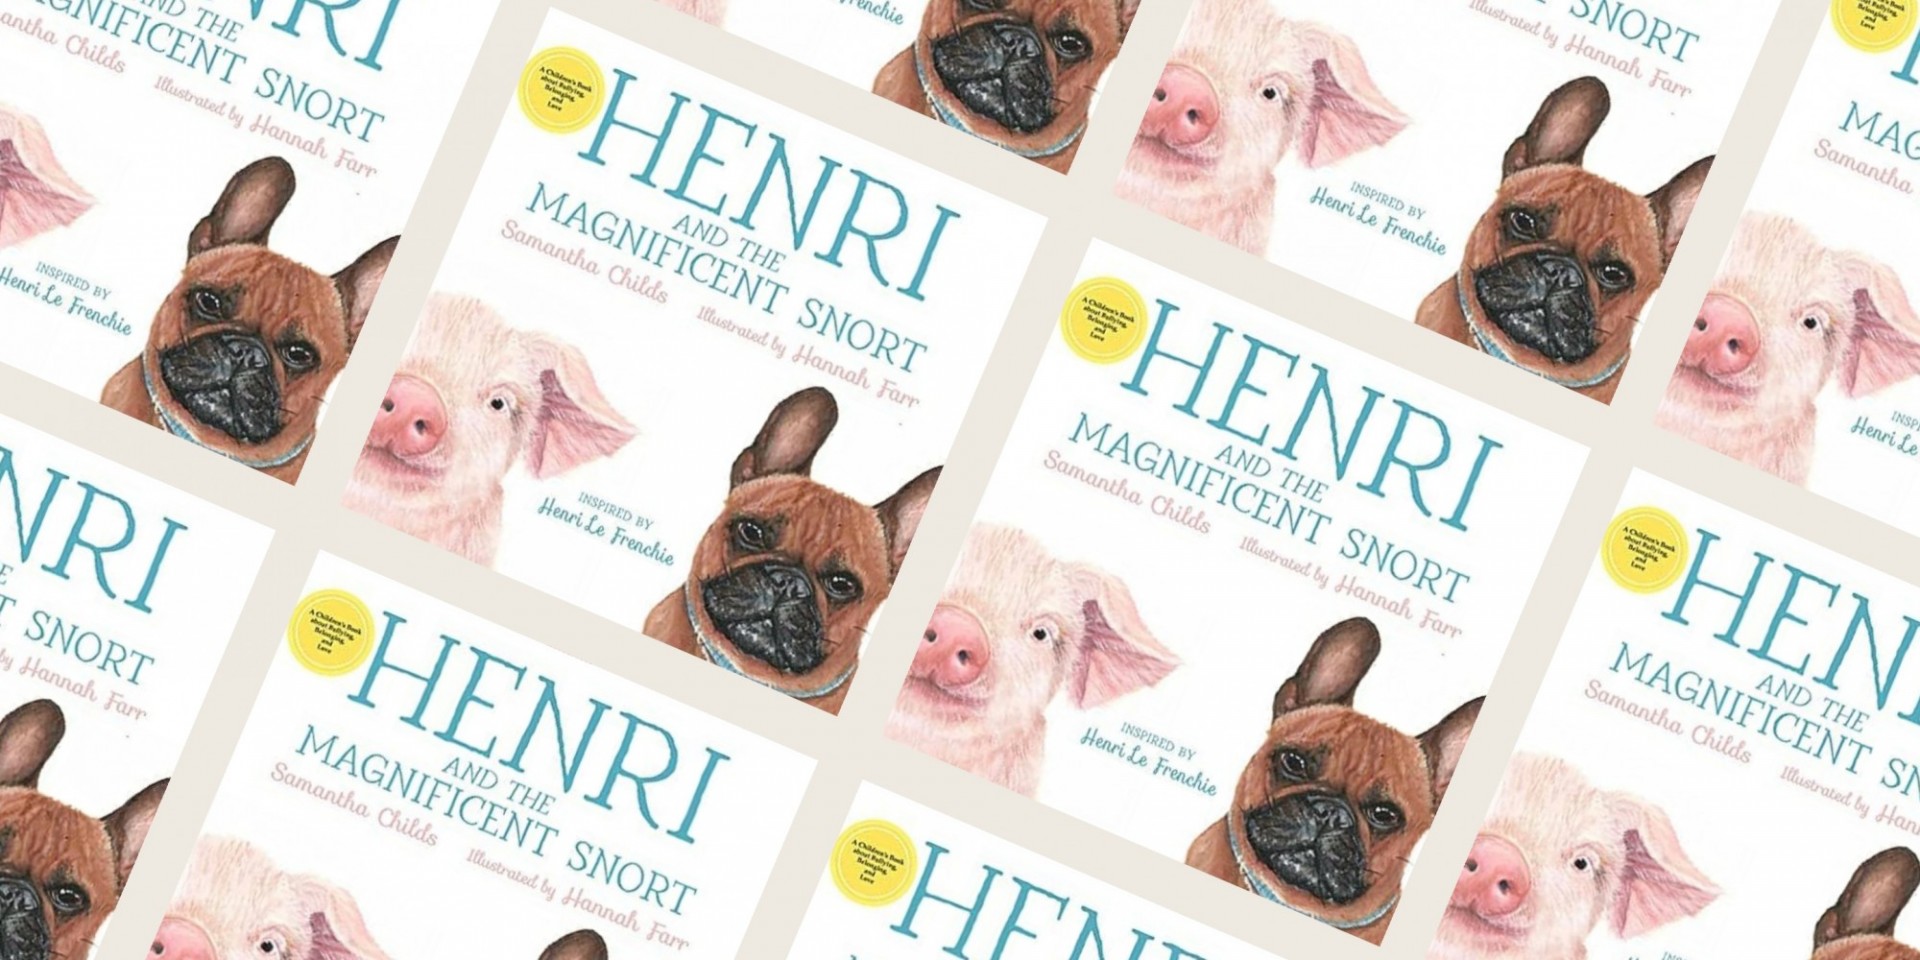 Henri and the Magnificent Snort cover